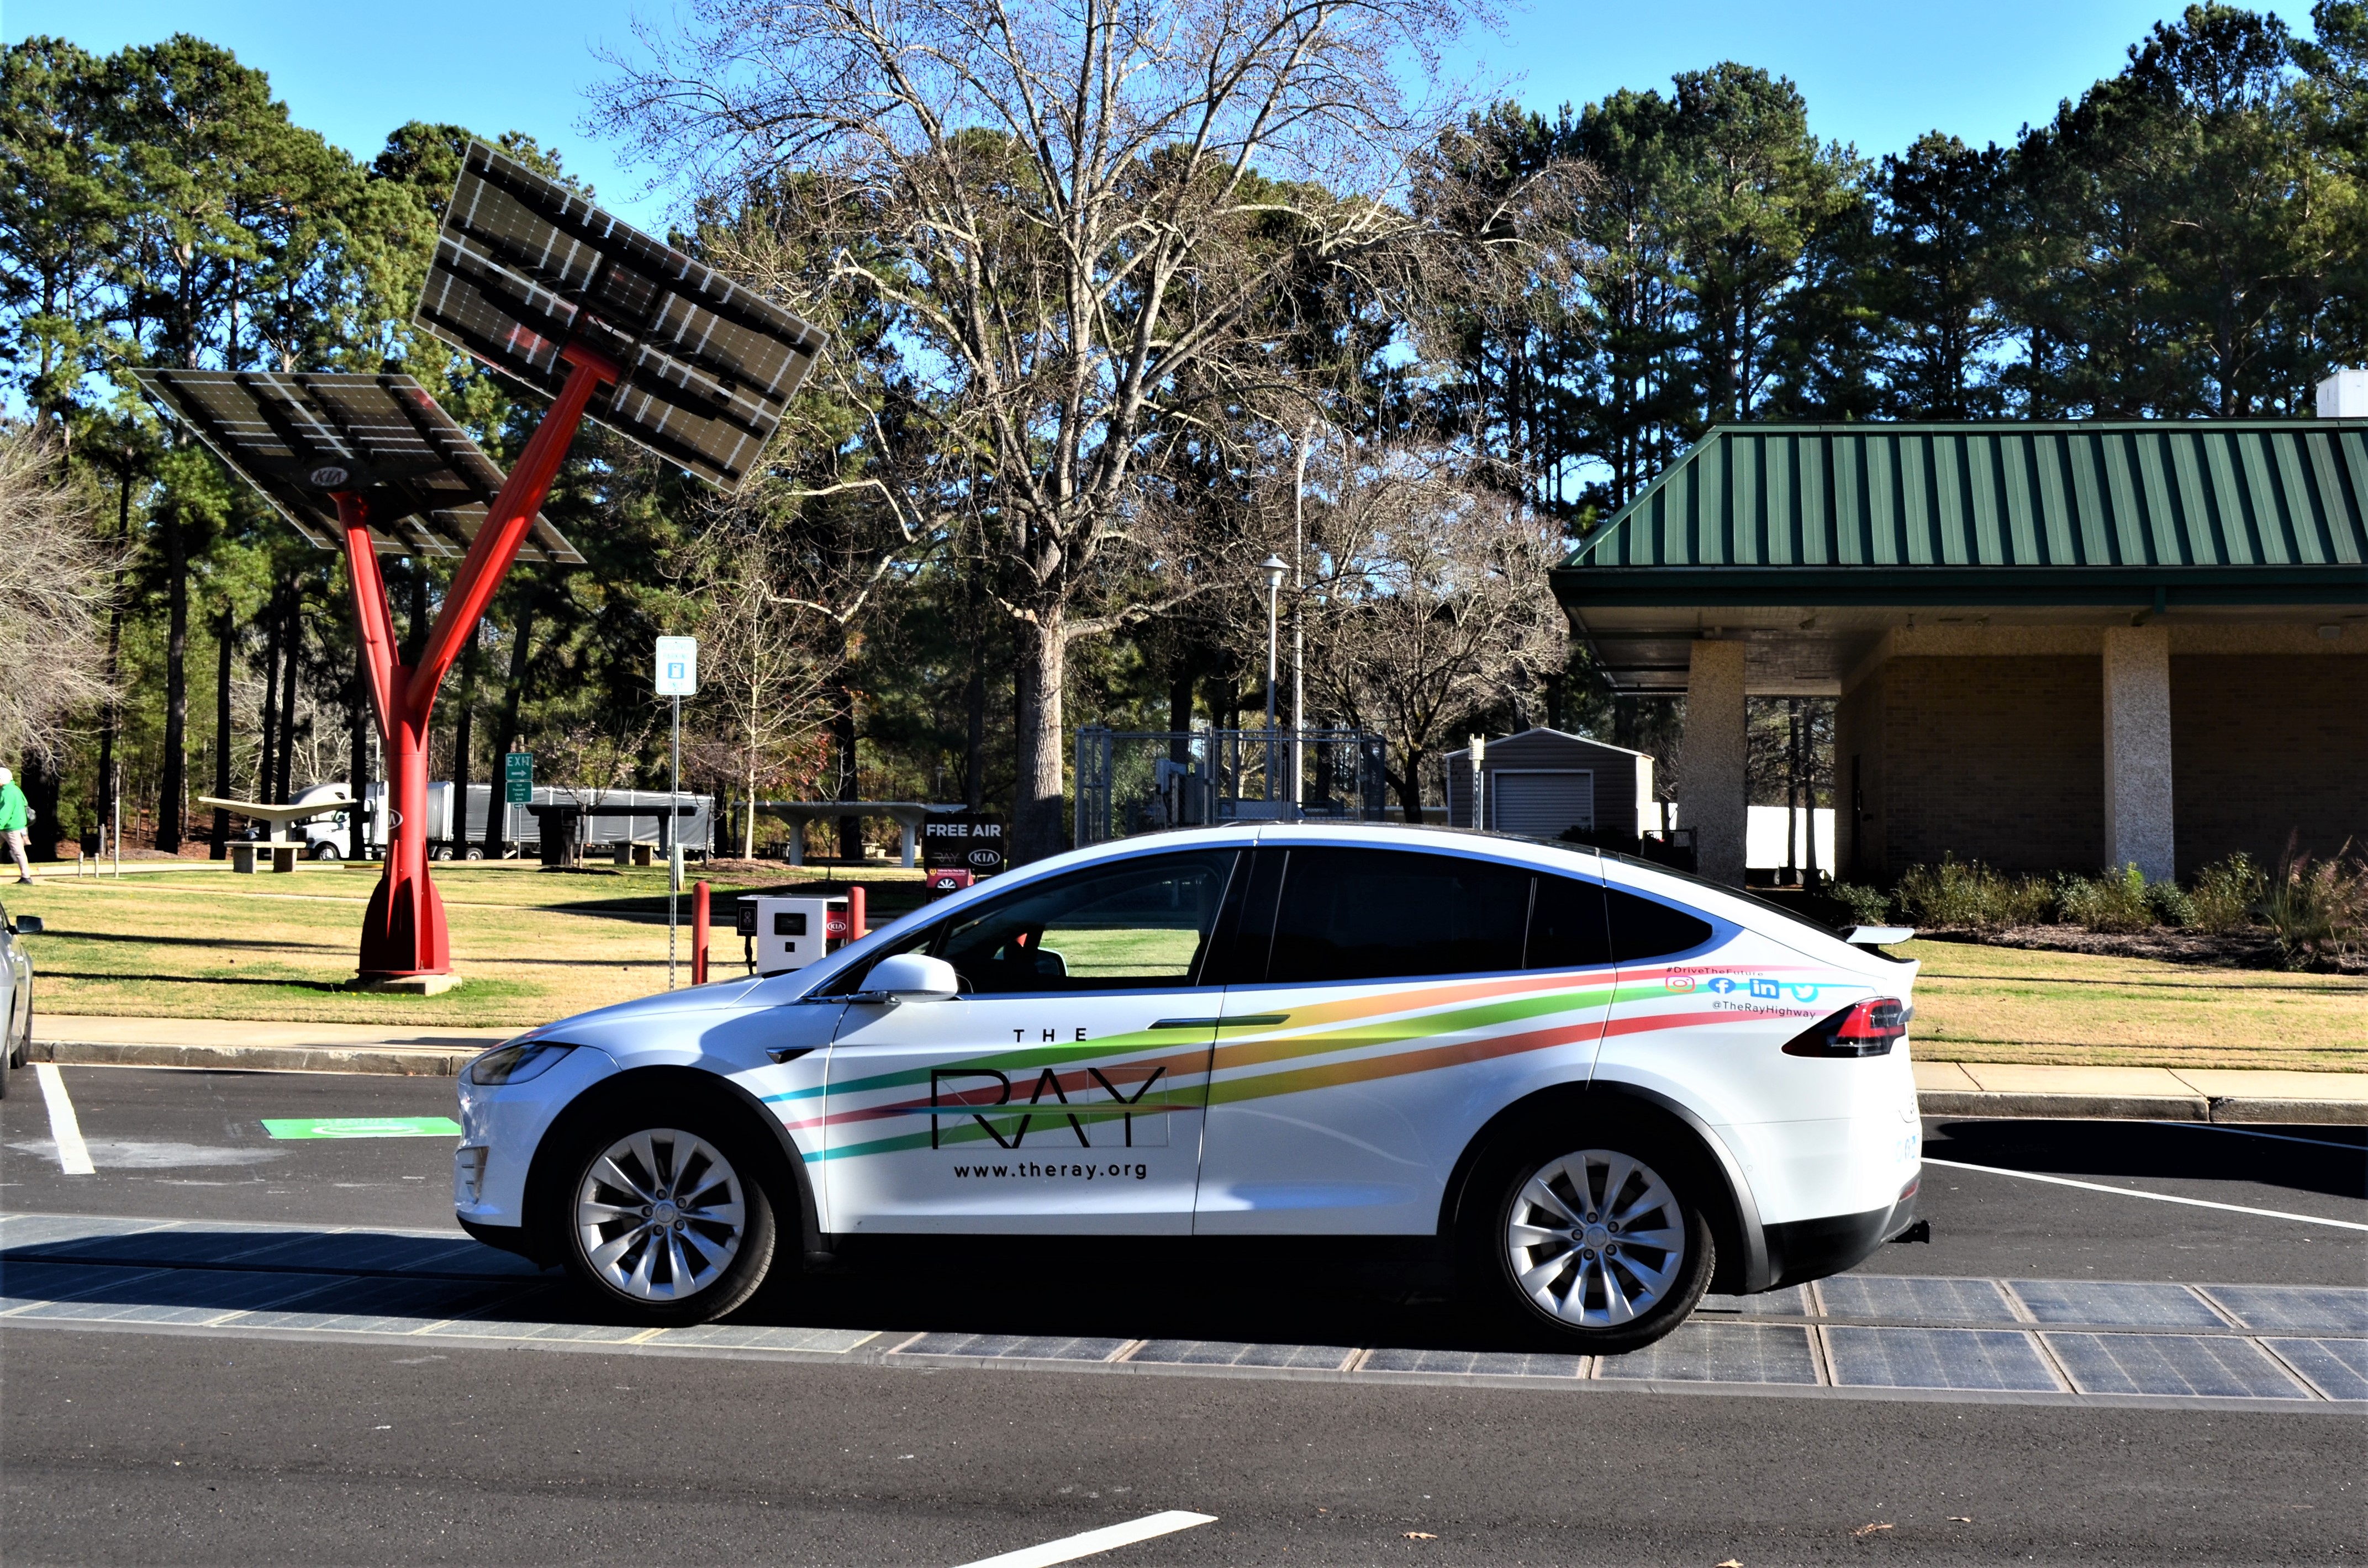 The solar-powered EV charging station at the Georgia Visitor Information Center.